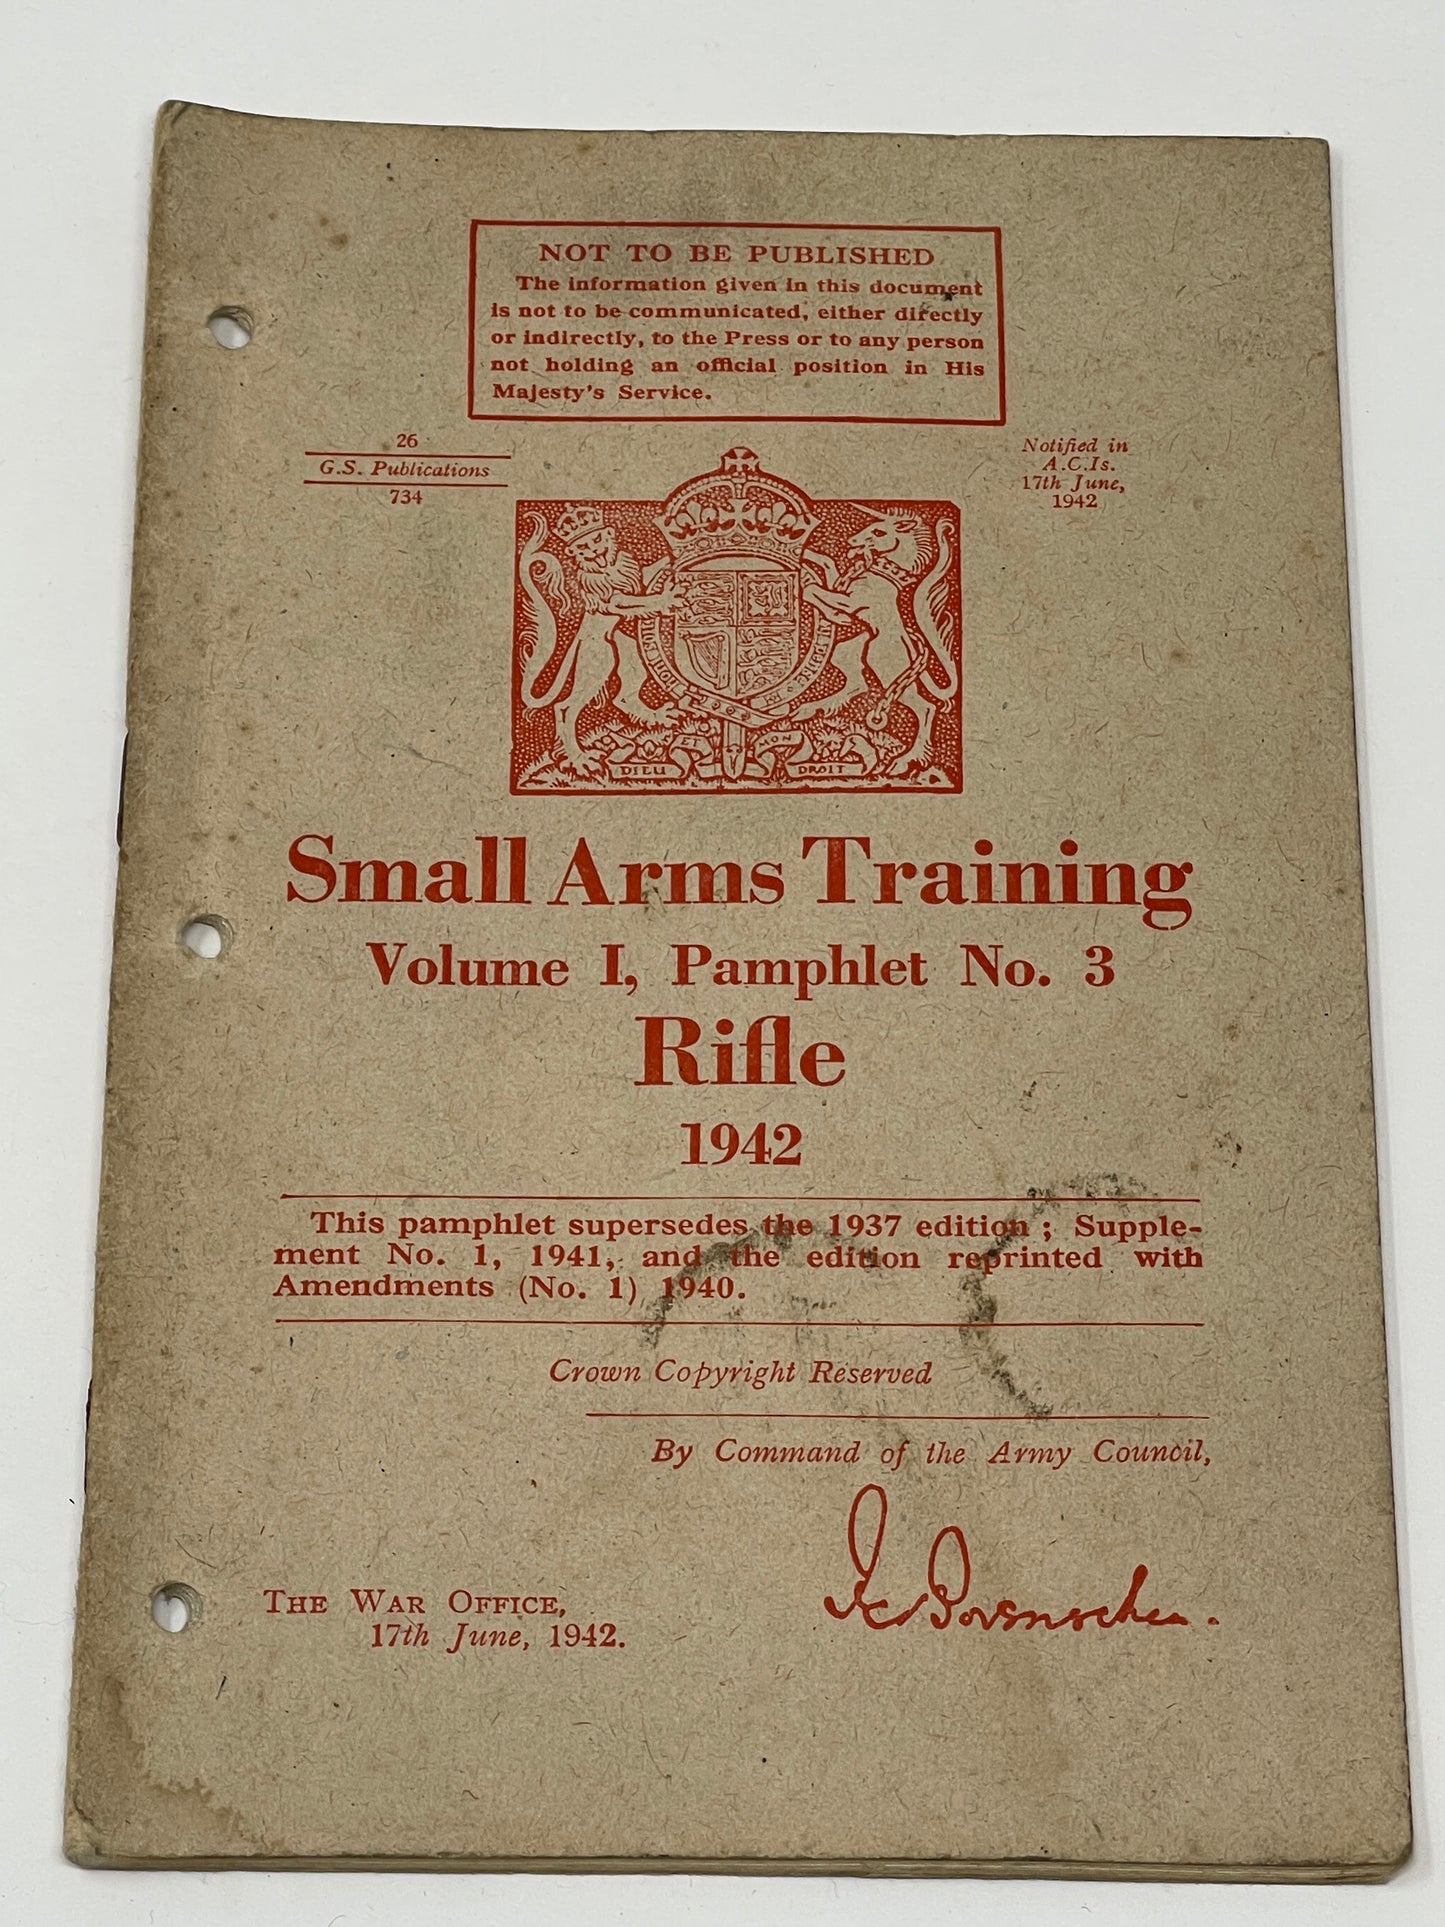 WW2 Small Arms training Vol 1 Pamphlet No 3 Rifle 1942